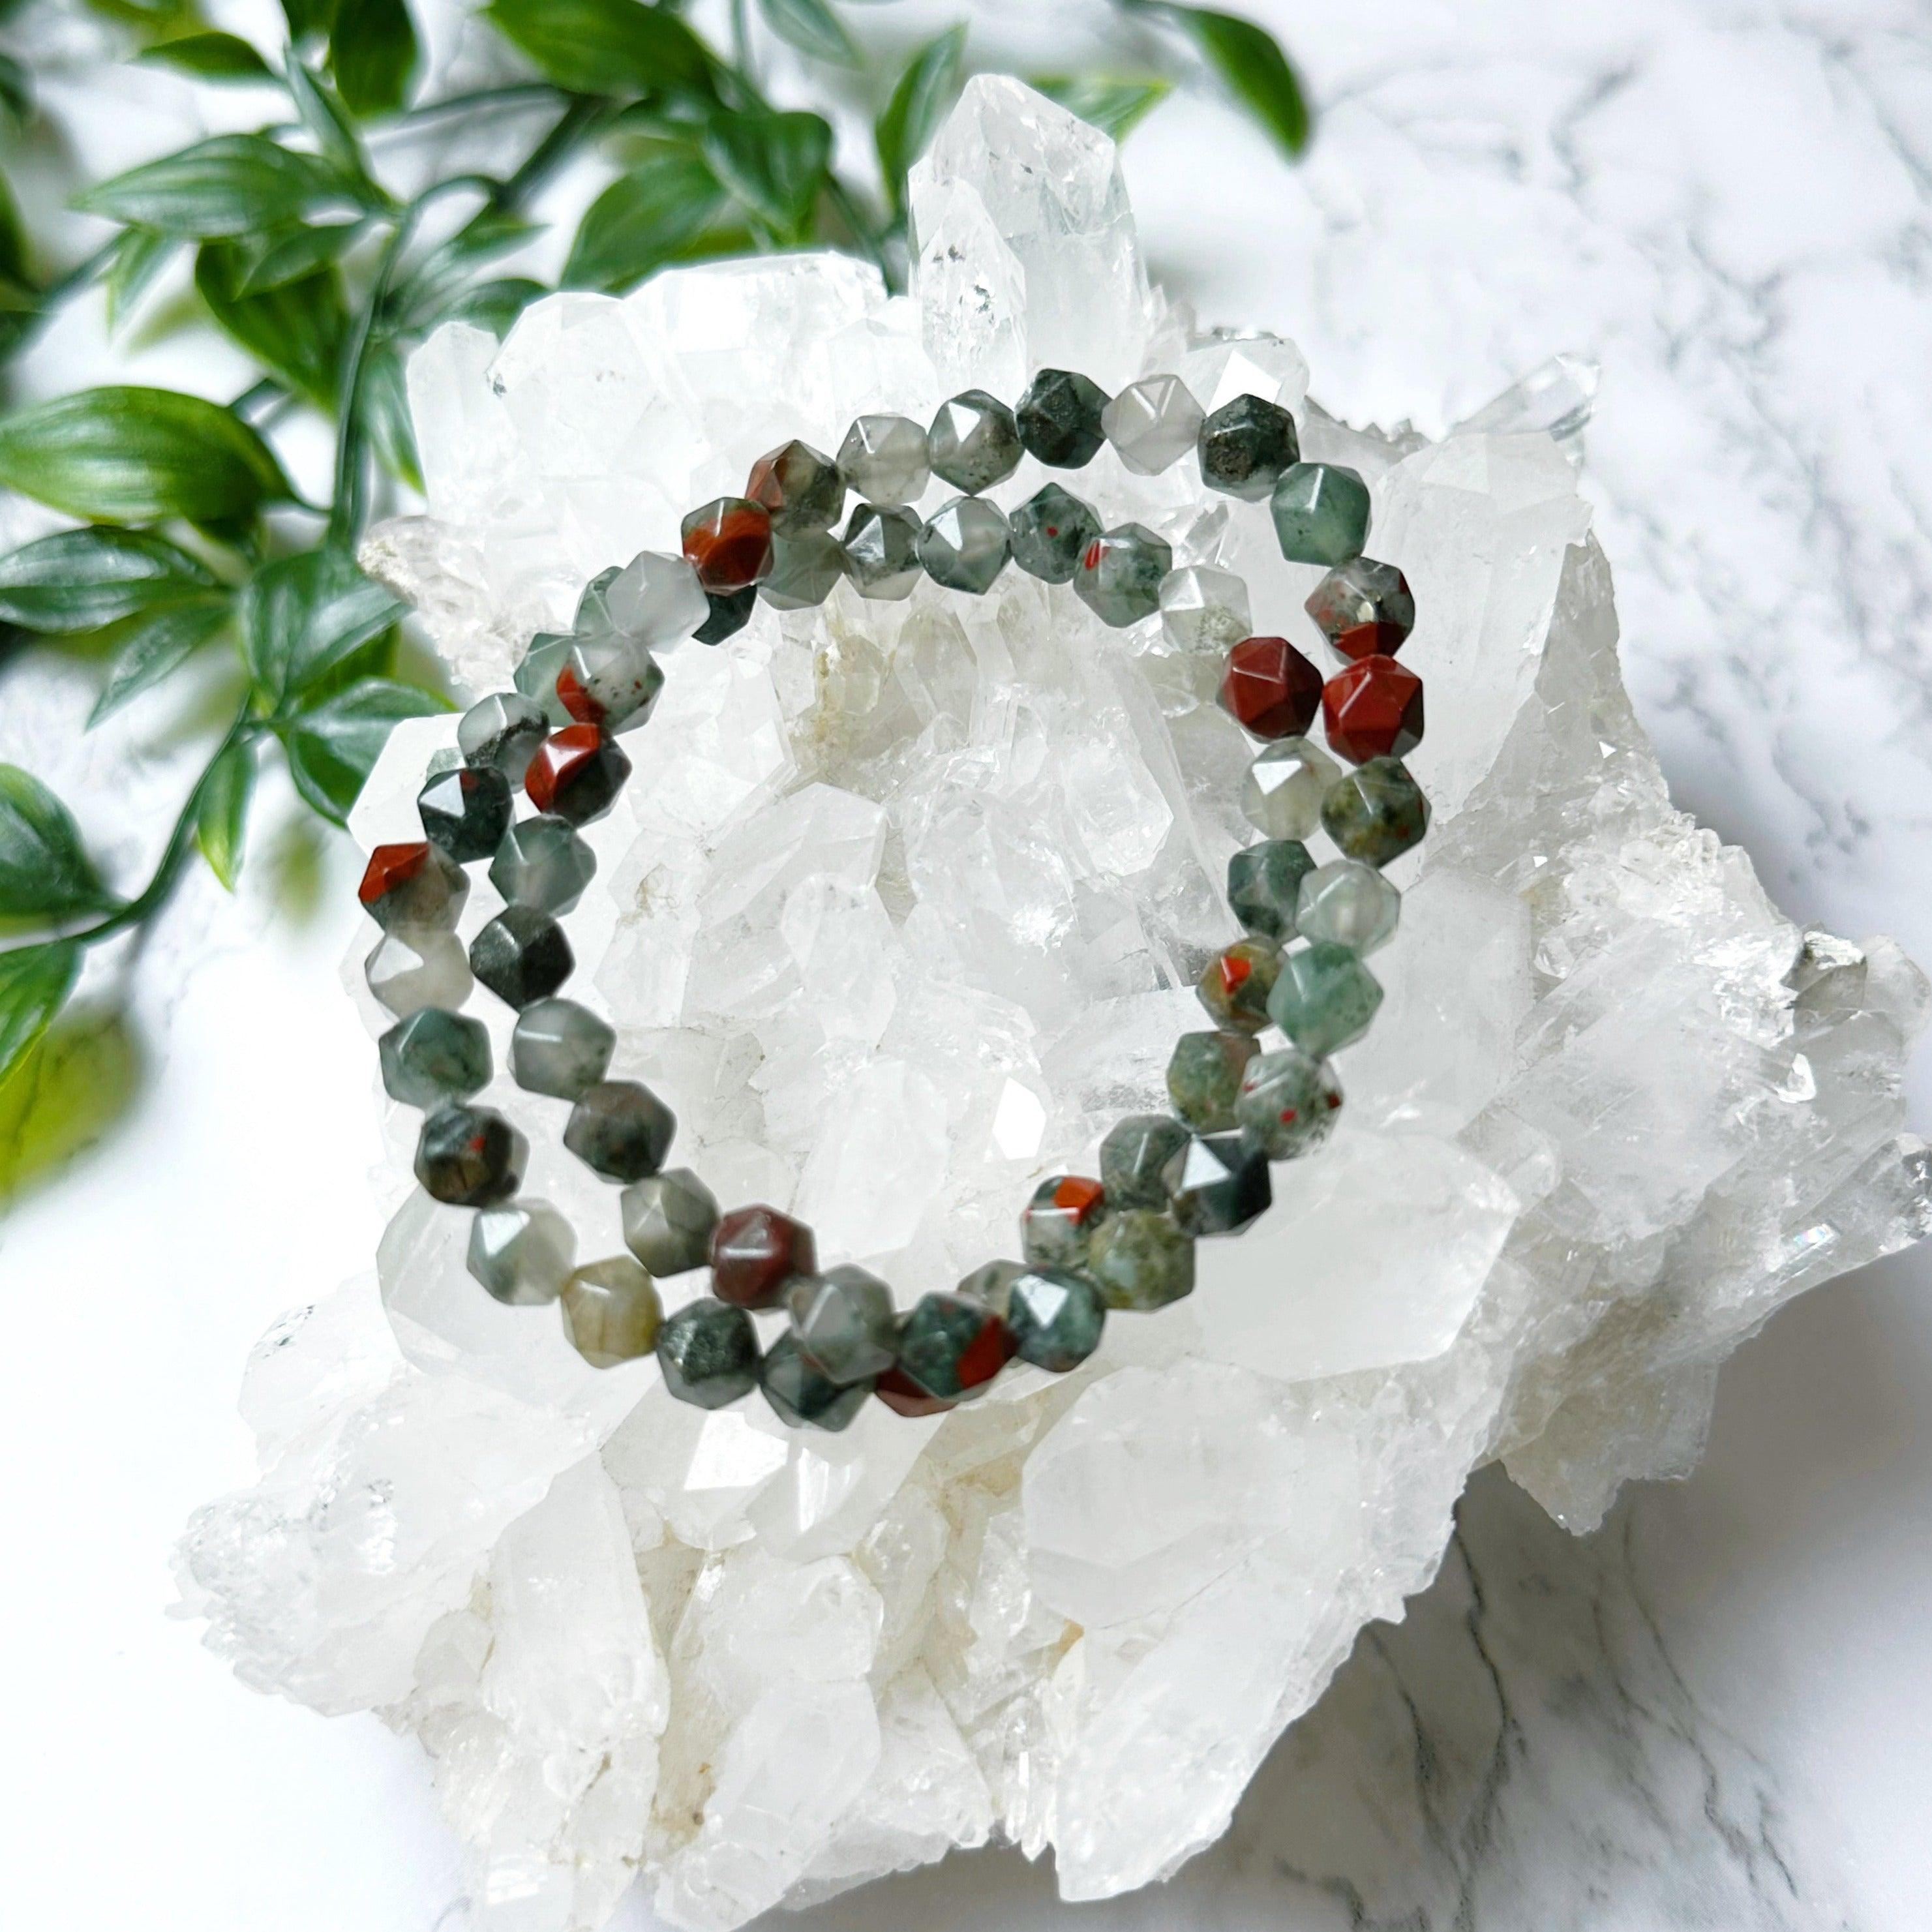 AFRICAN BLOODSTONE (STAR CUT) 6mm - HANDMADE CRYSTAL BRACELET - 6mm, African bloodstone, Aries, aries stack, bracelet, crystal bracelet, earth, emotional support, Friday the 13th, handmade bracelet, jewelry, libra, libra stack, market bracelet, mixed colors, pisces, pisces stack, protection gift bundle, recently added, scorpio stack, star cut, Wearable - The Mineral Maven